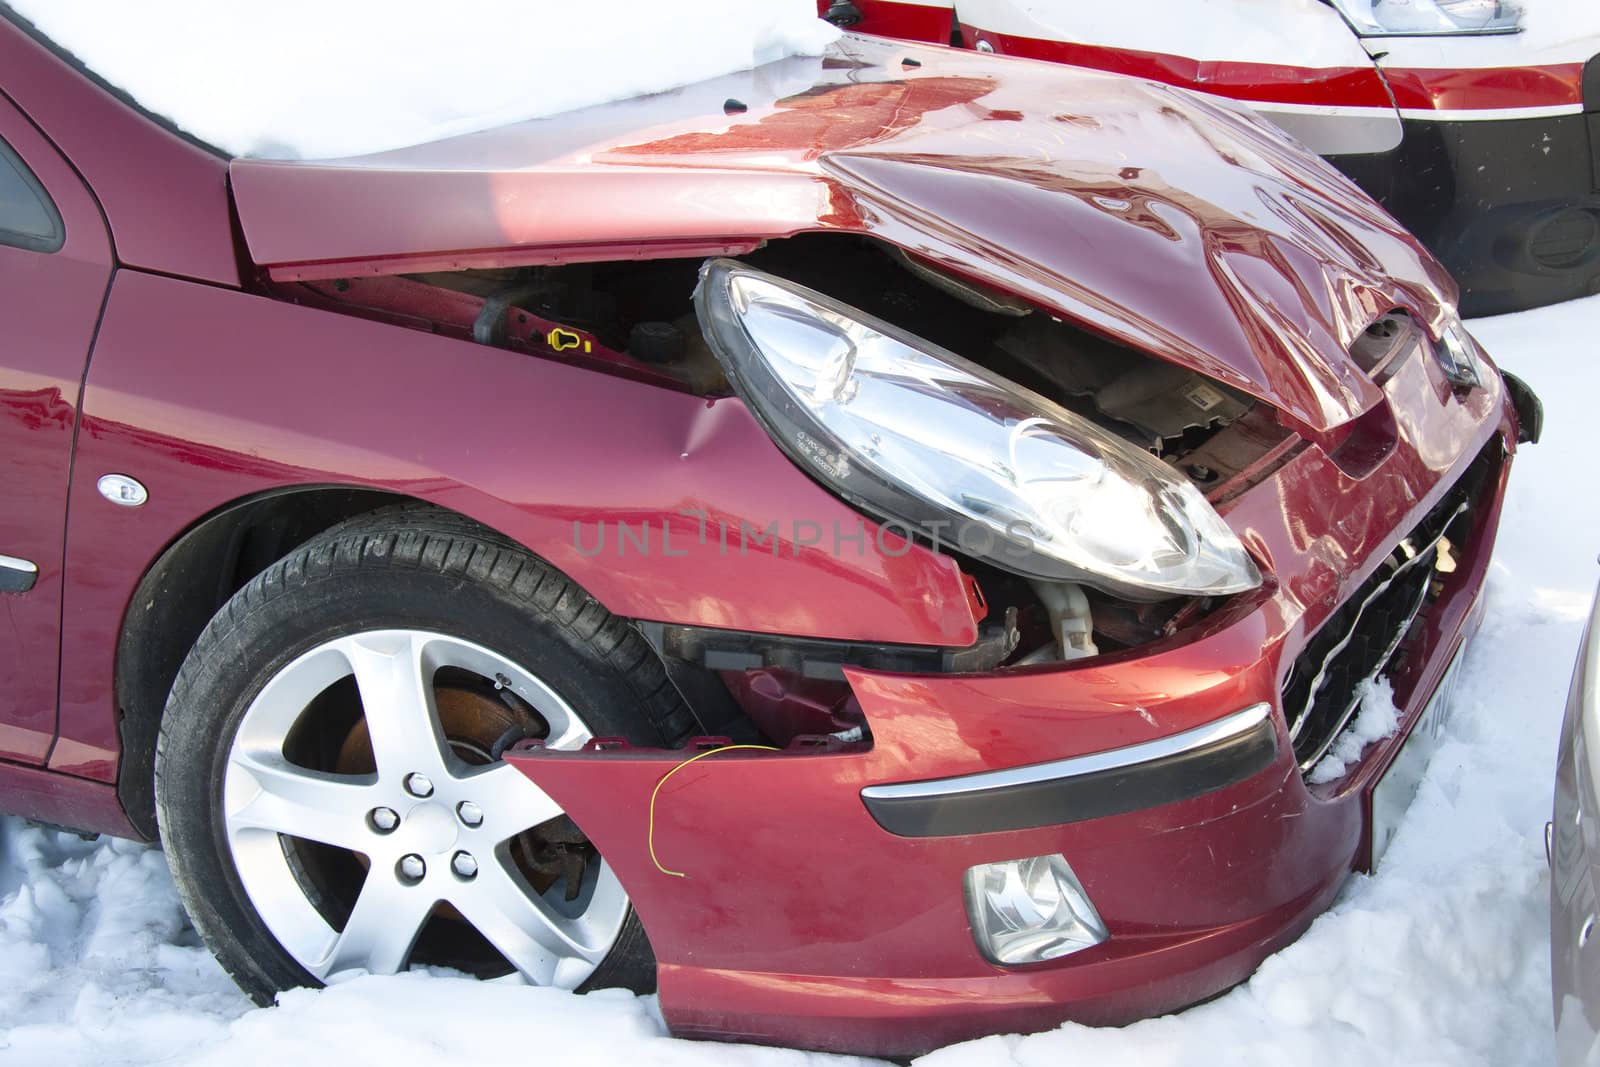 Red car in winter crushed. Damage front of vehicle.